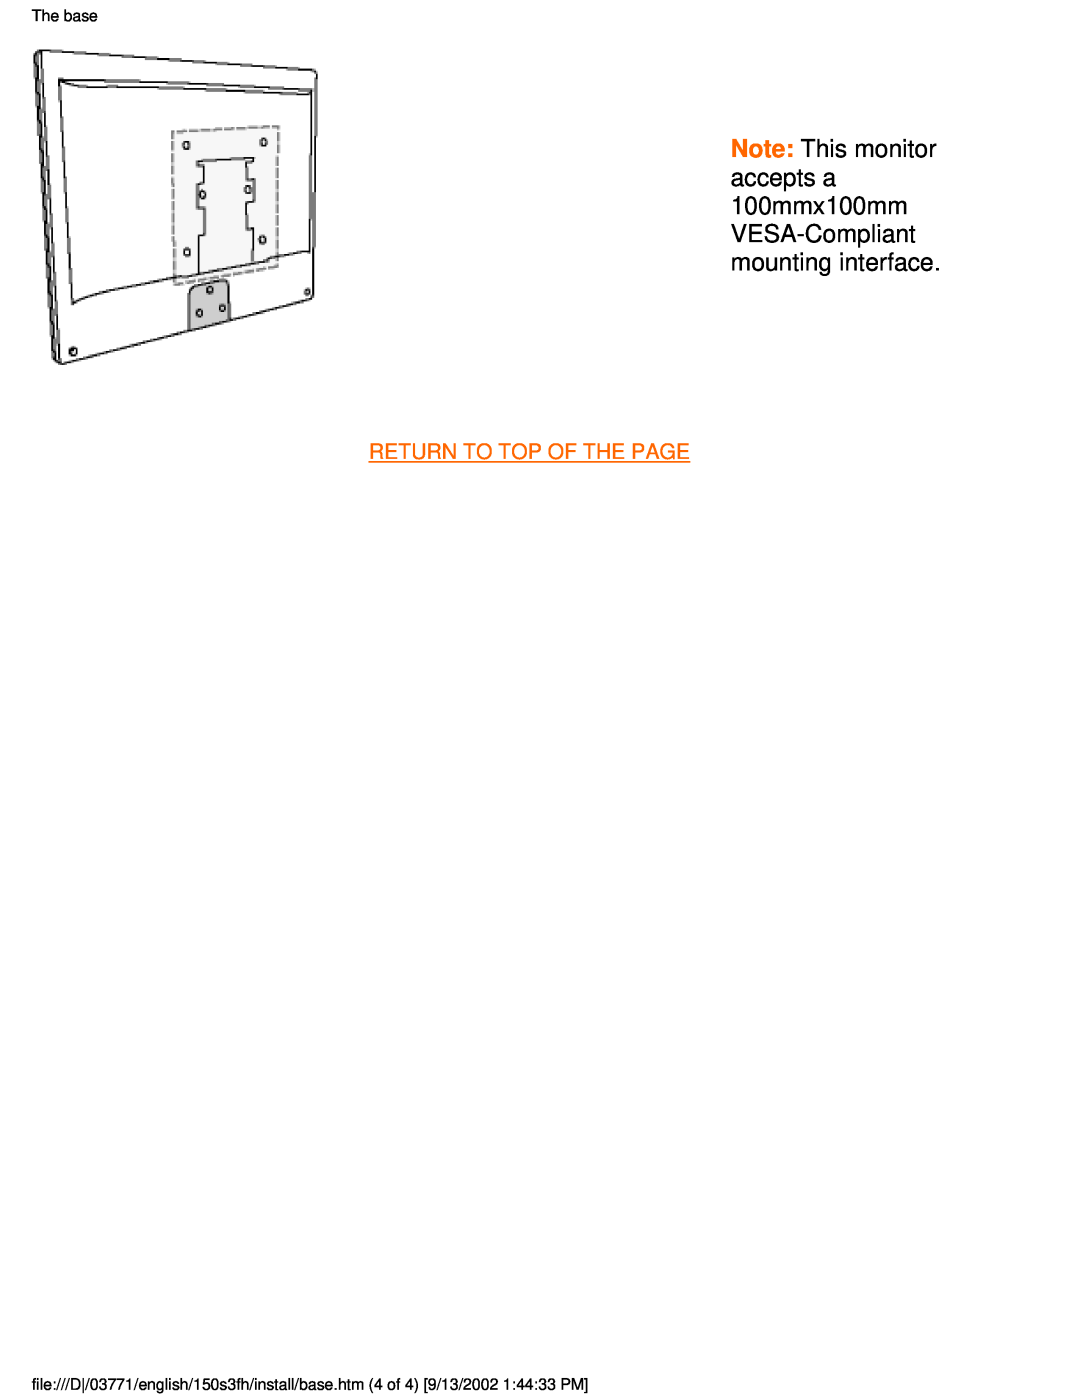 Philips 150S3F user manual Return To Top Of The Page, The base 